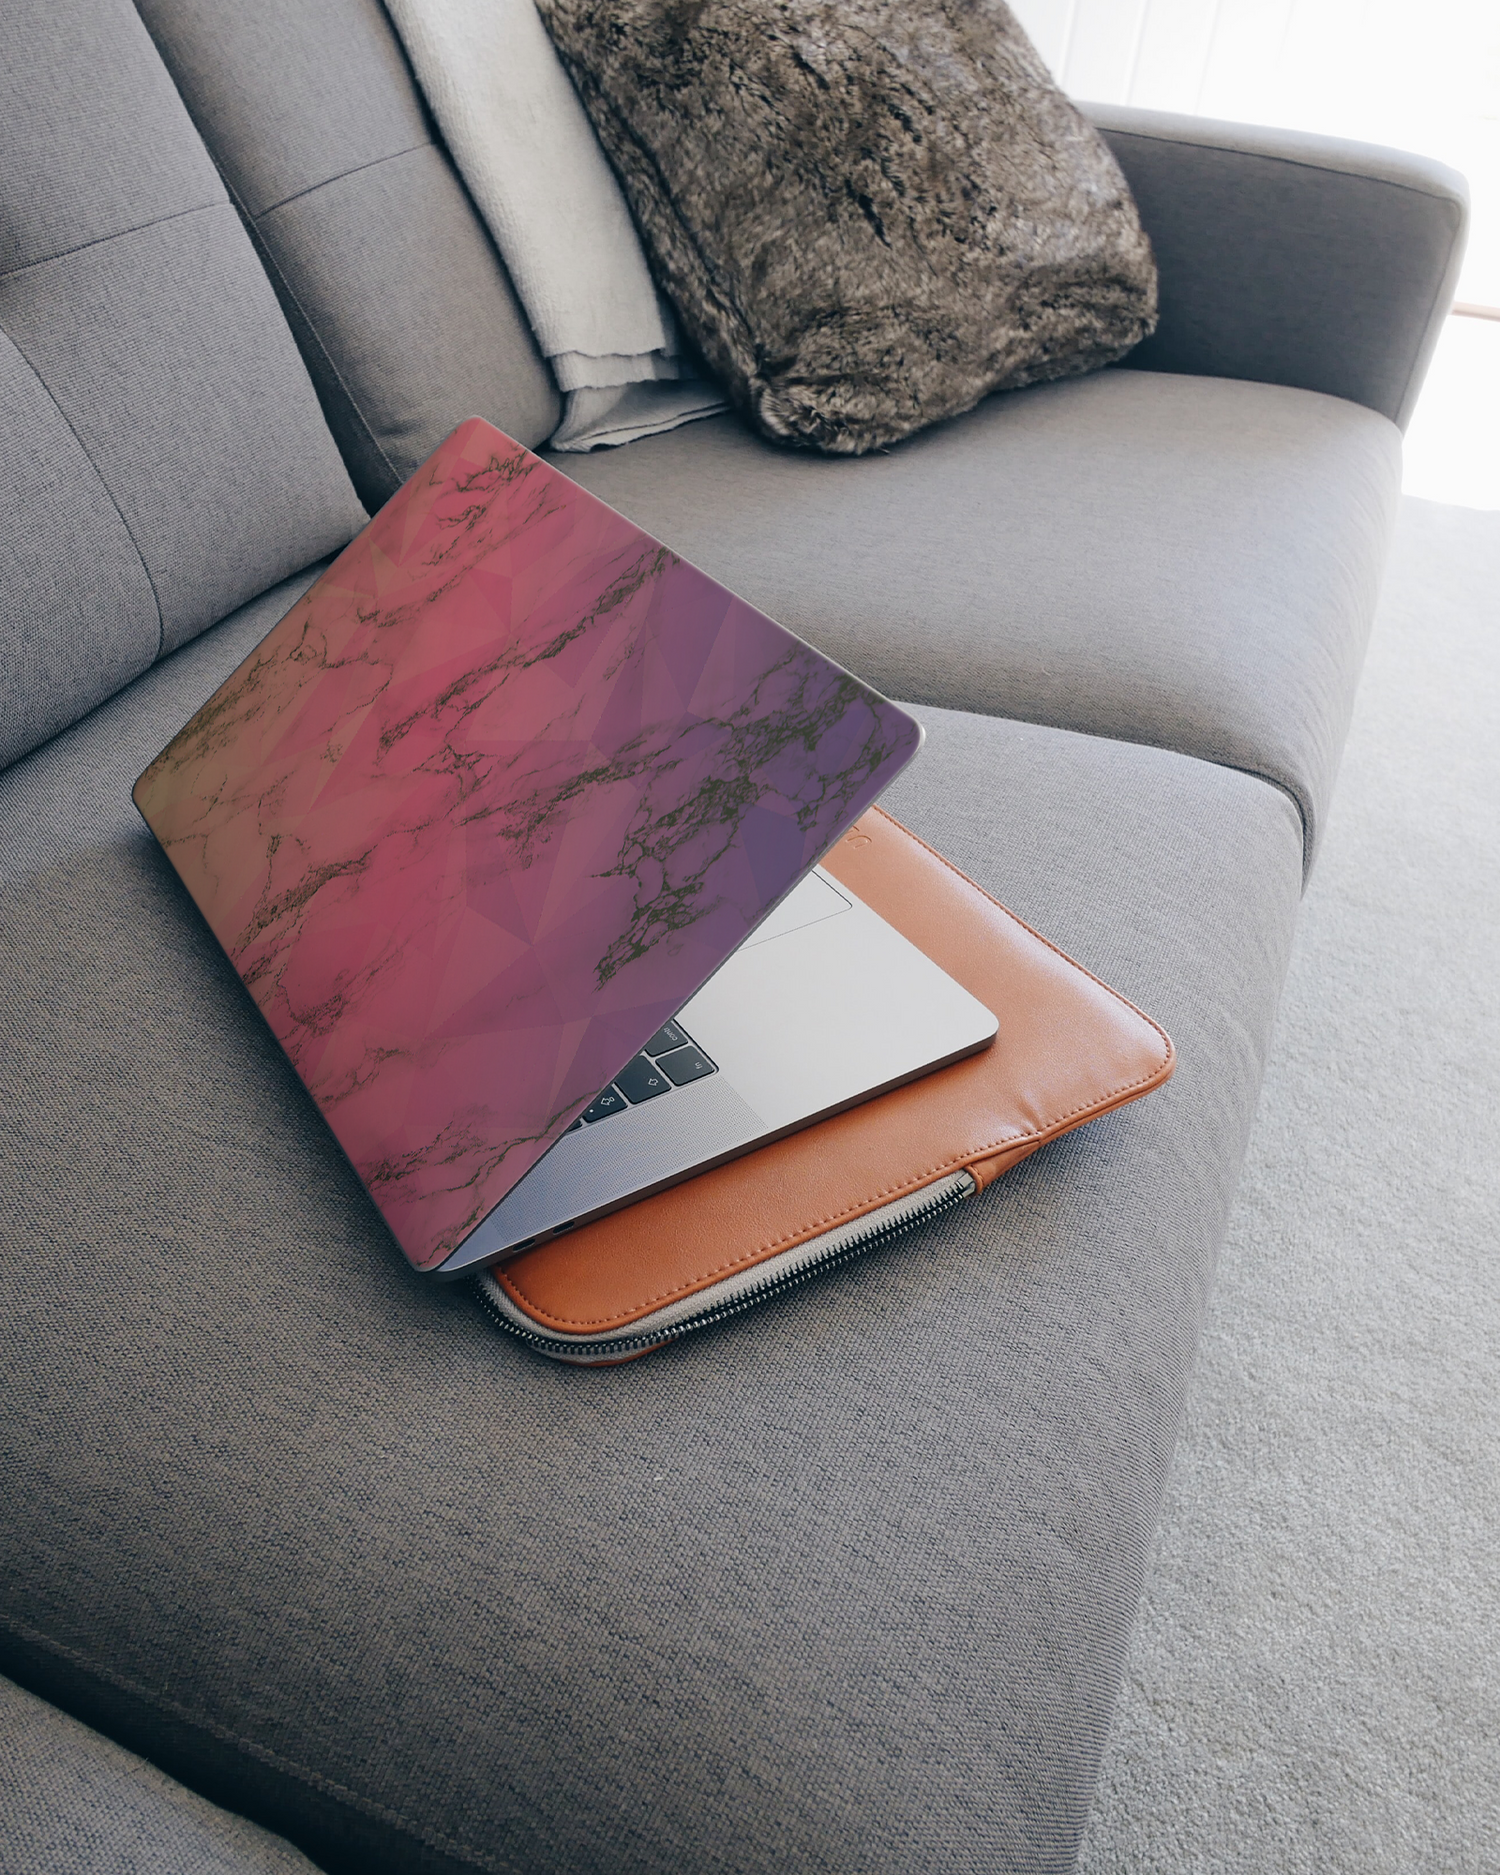 Marbled Triangles Laptop Skin for 15 inch Apple MacBooks on a couch